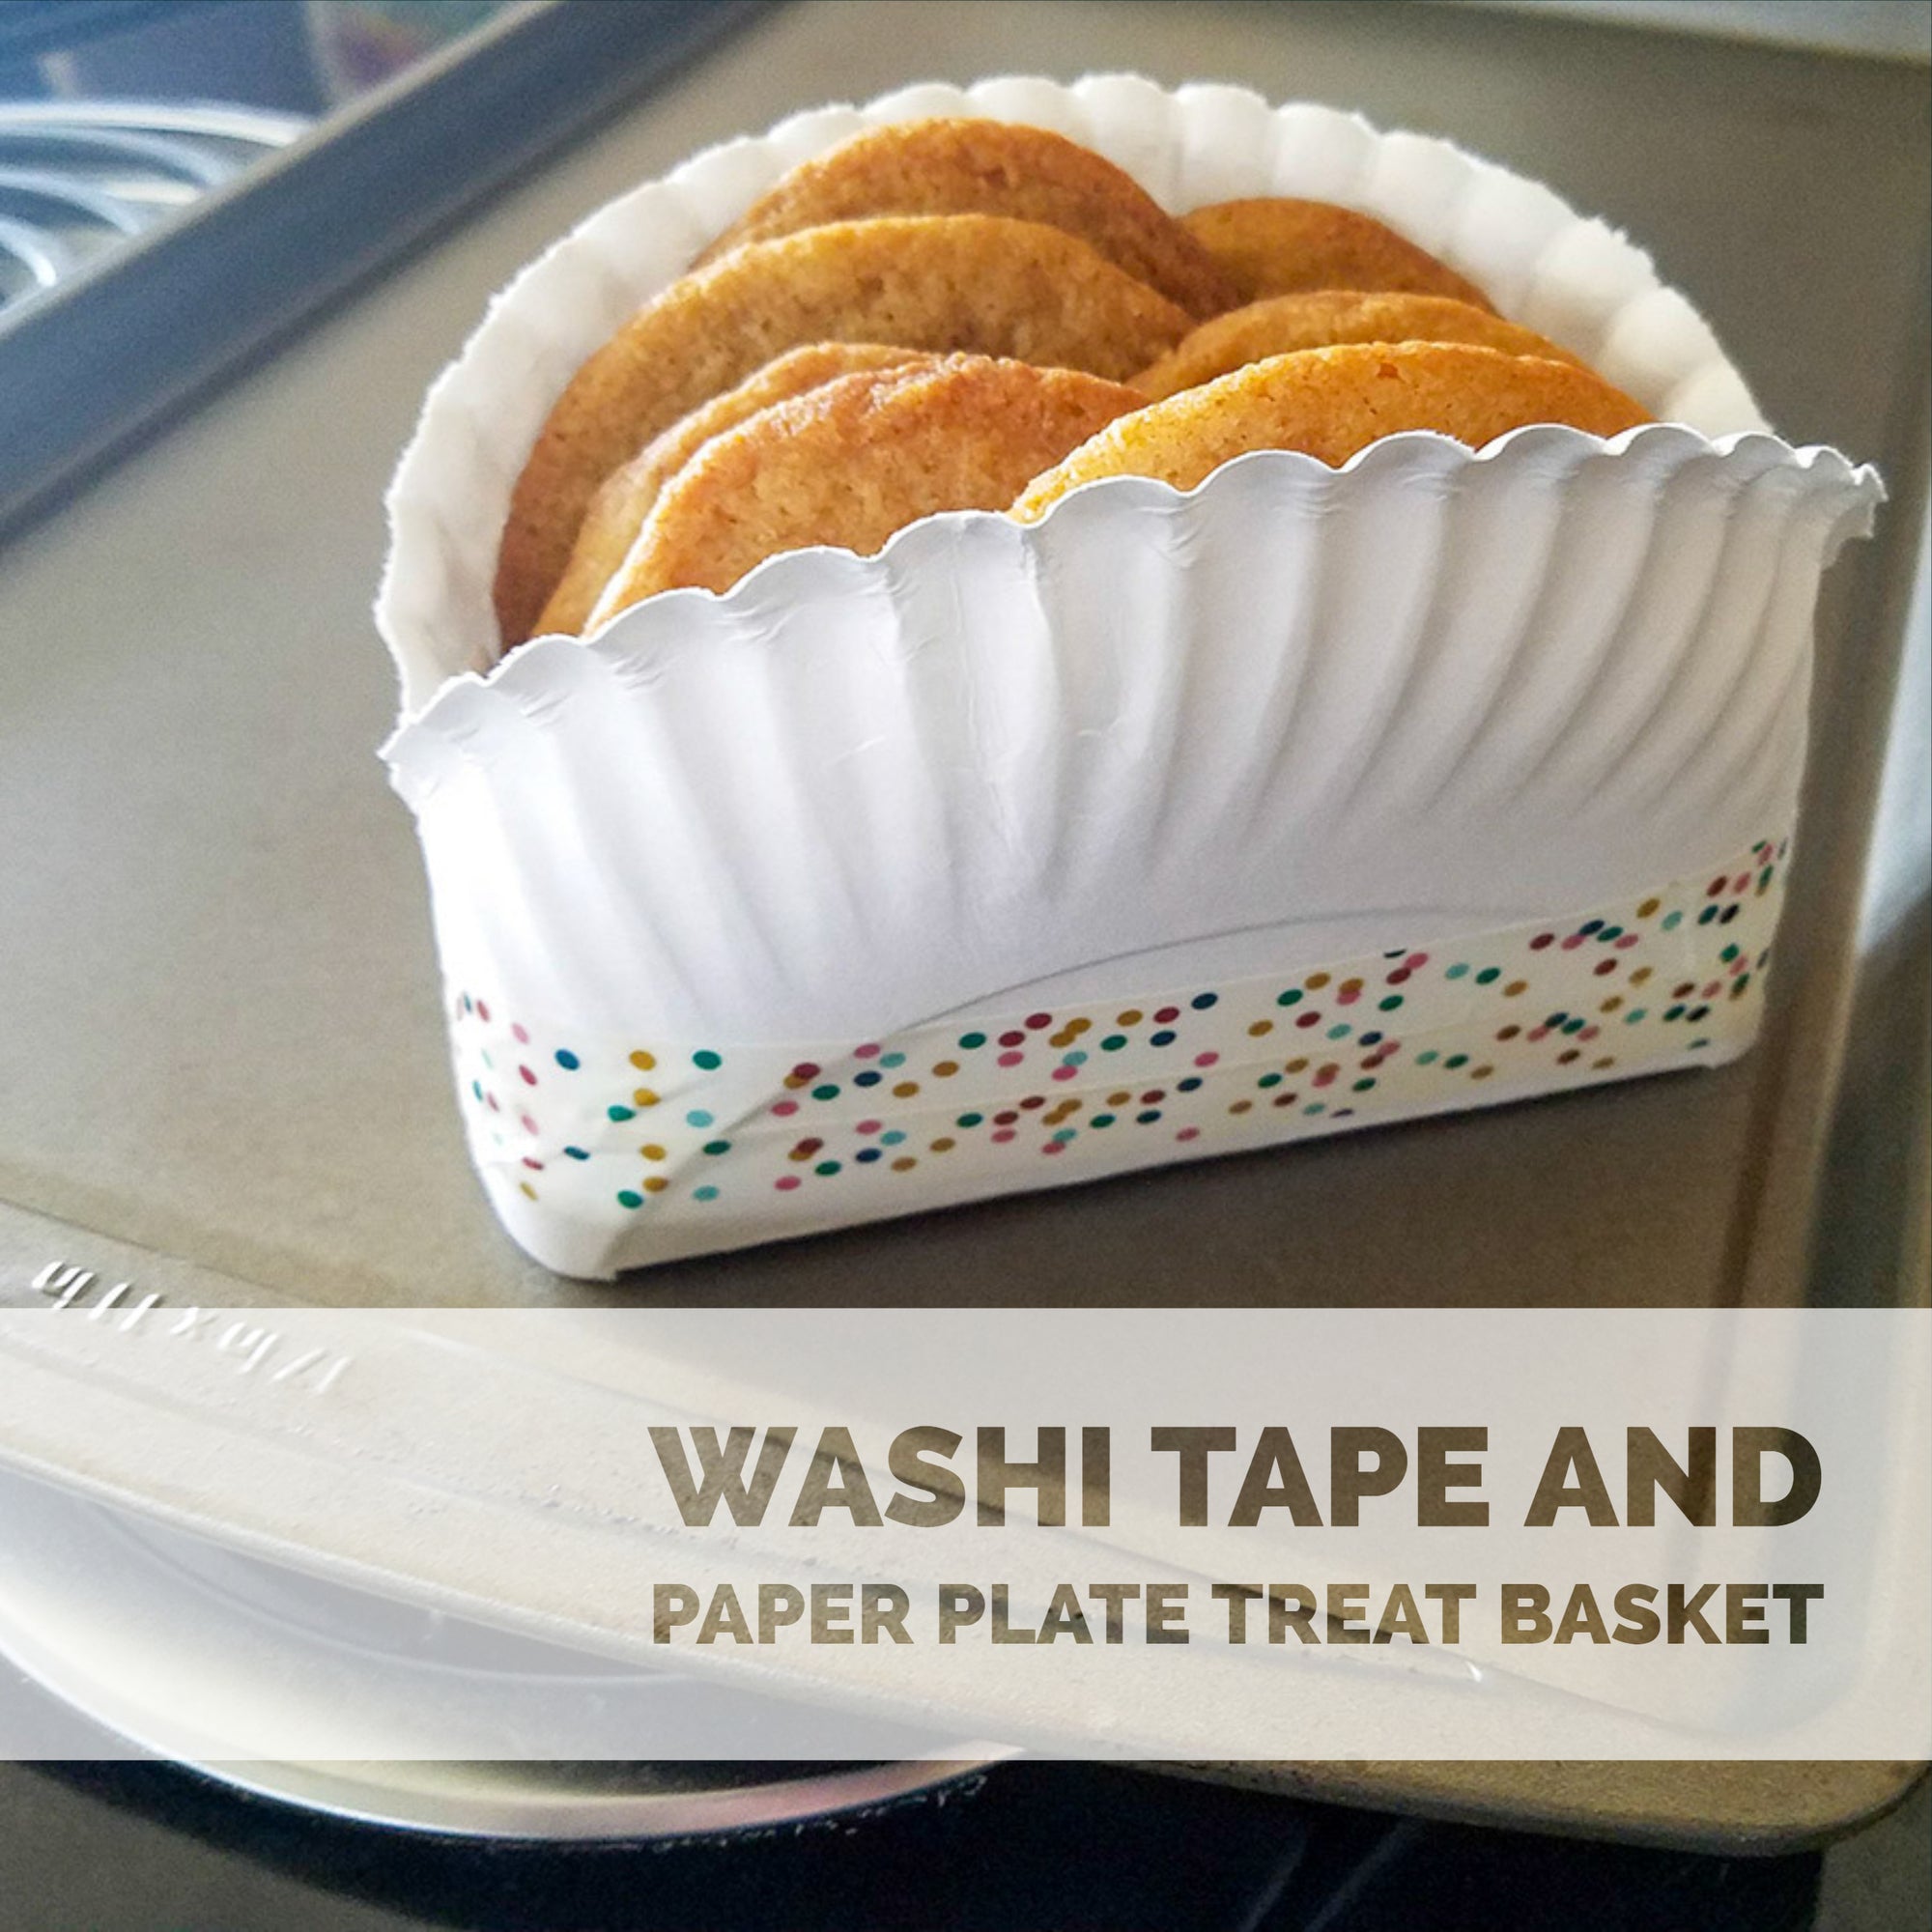 Tutorial for Making a Paper Plate Basket decorated with Washi Tape